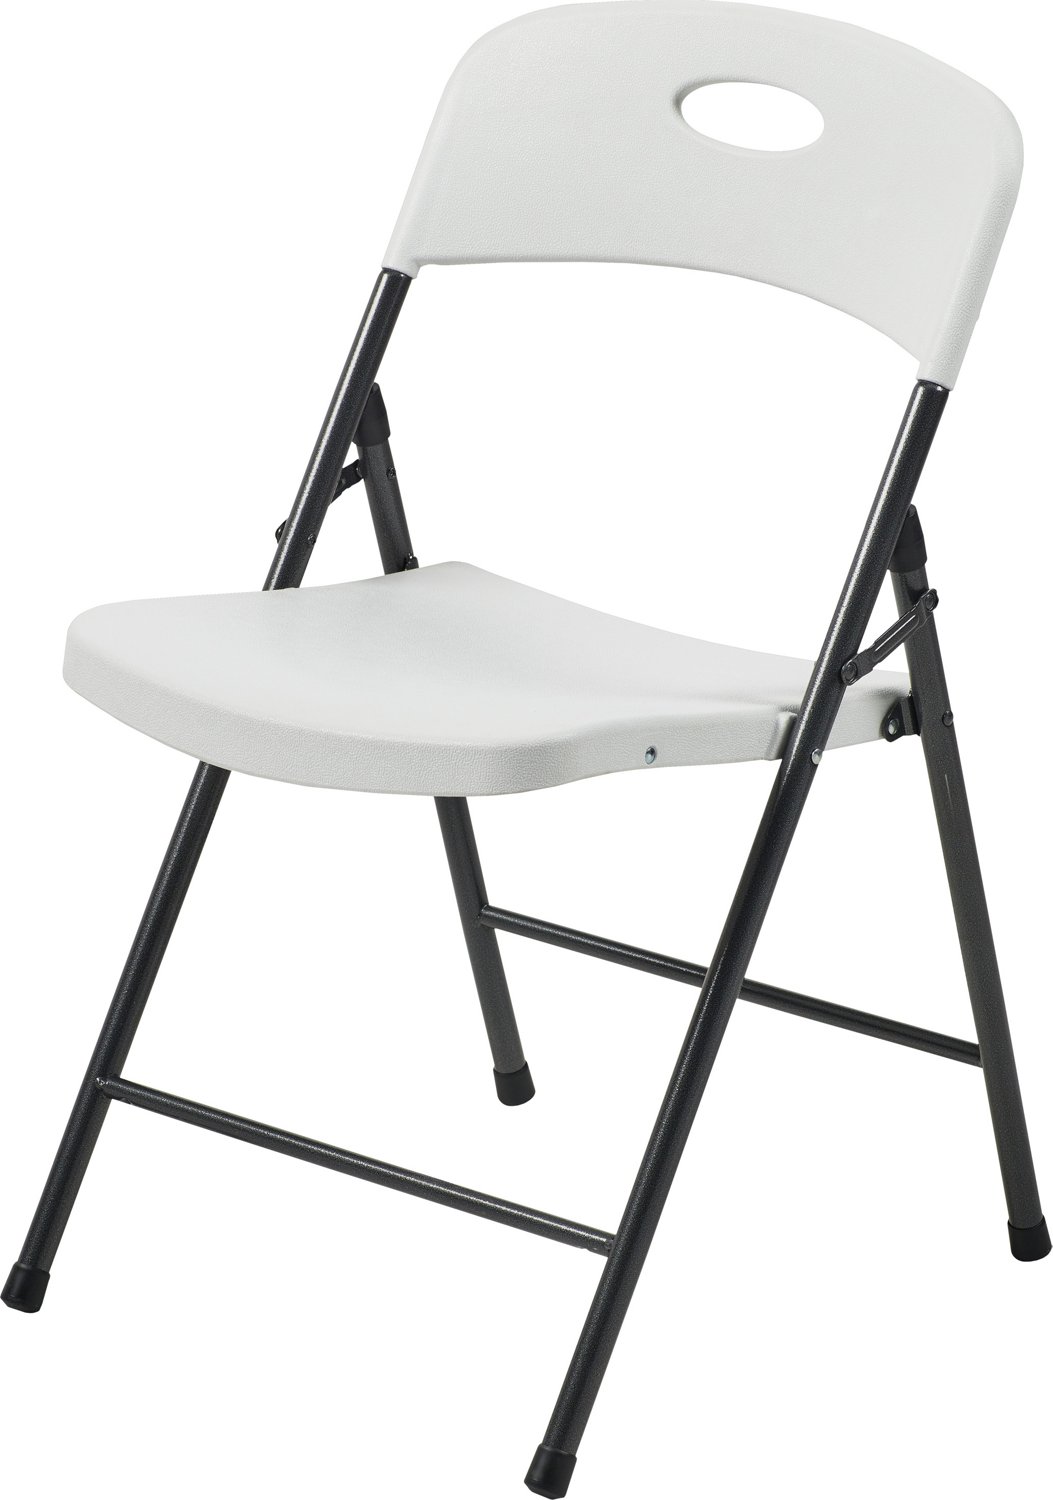 Academy Sports + Outdoors Resin Folding Chair                                                                                    - view number 1 selected